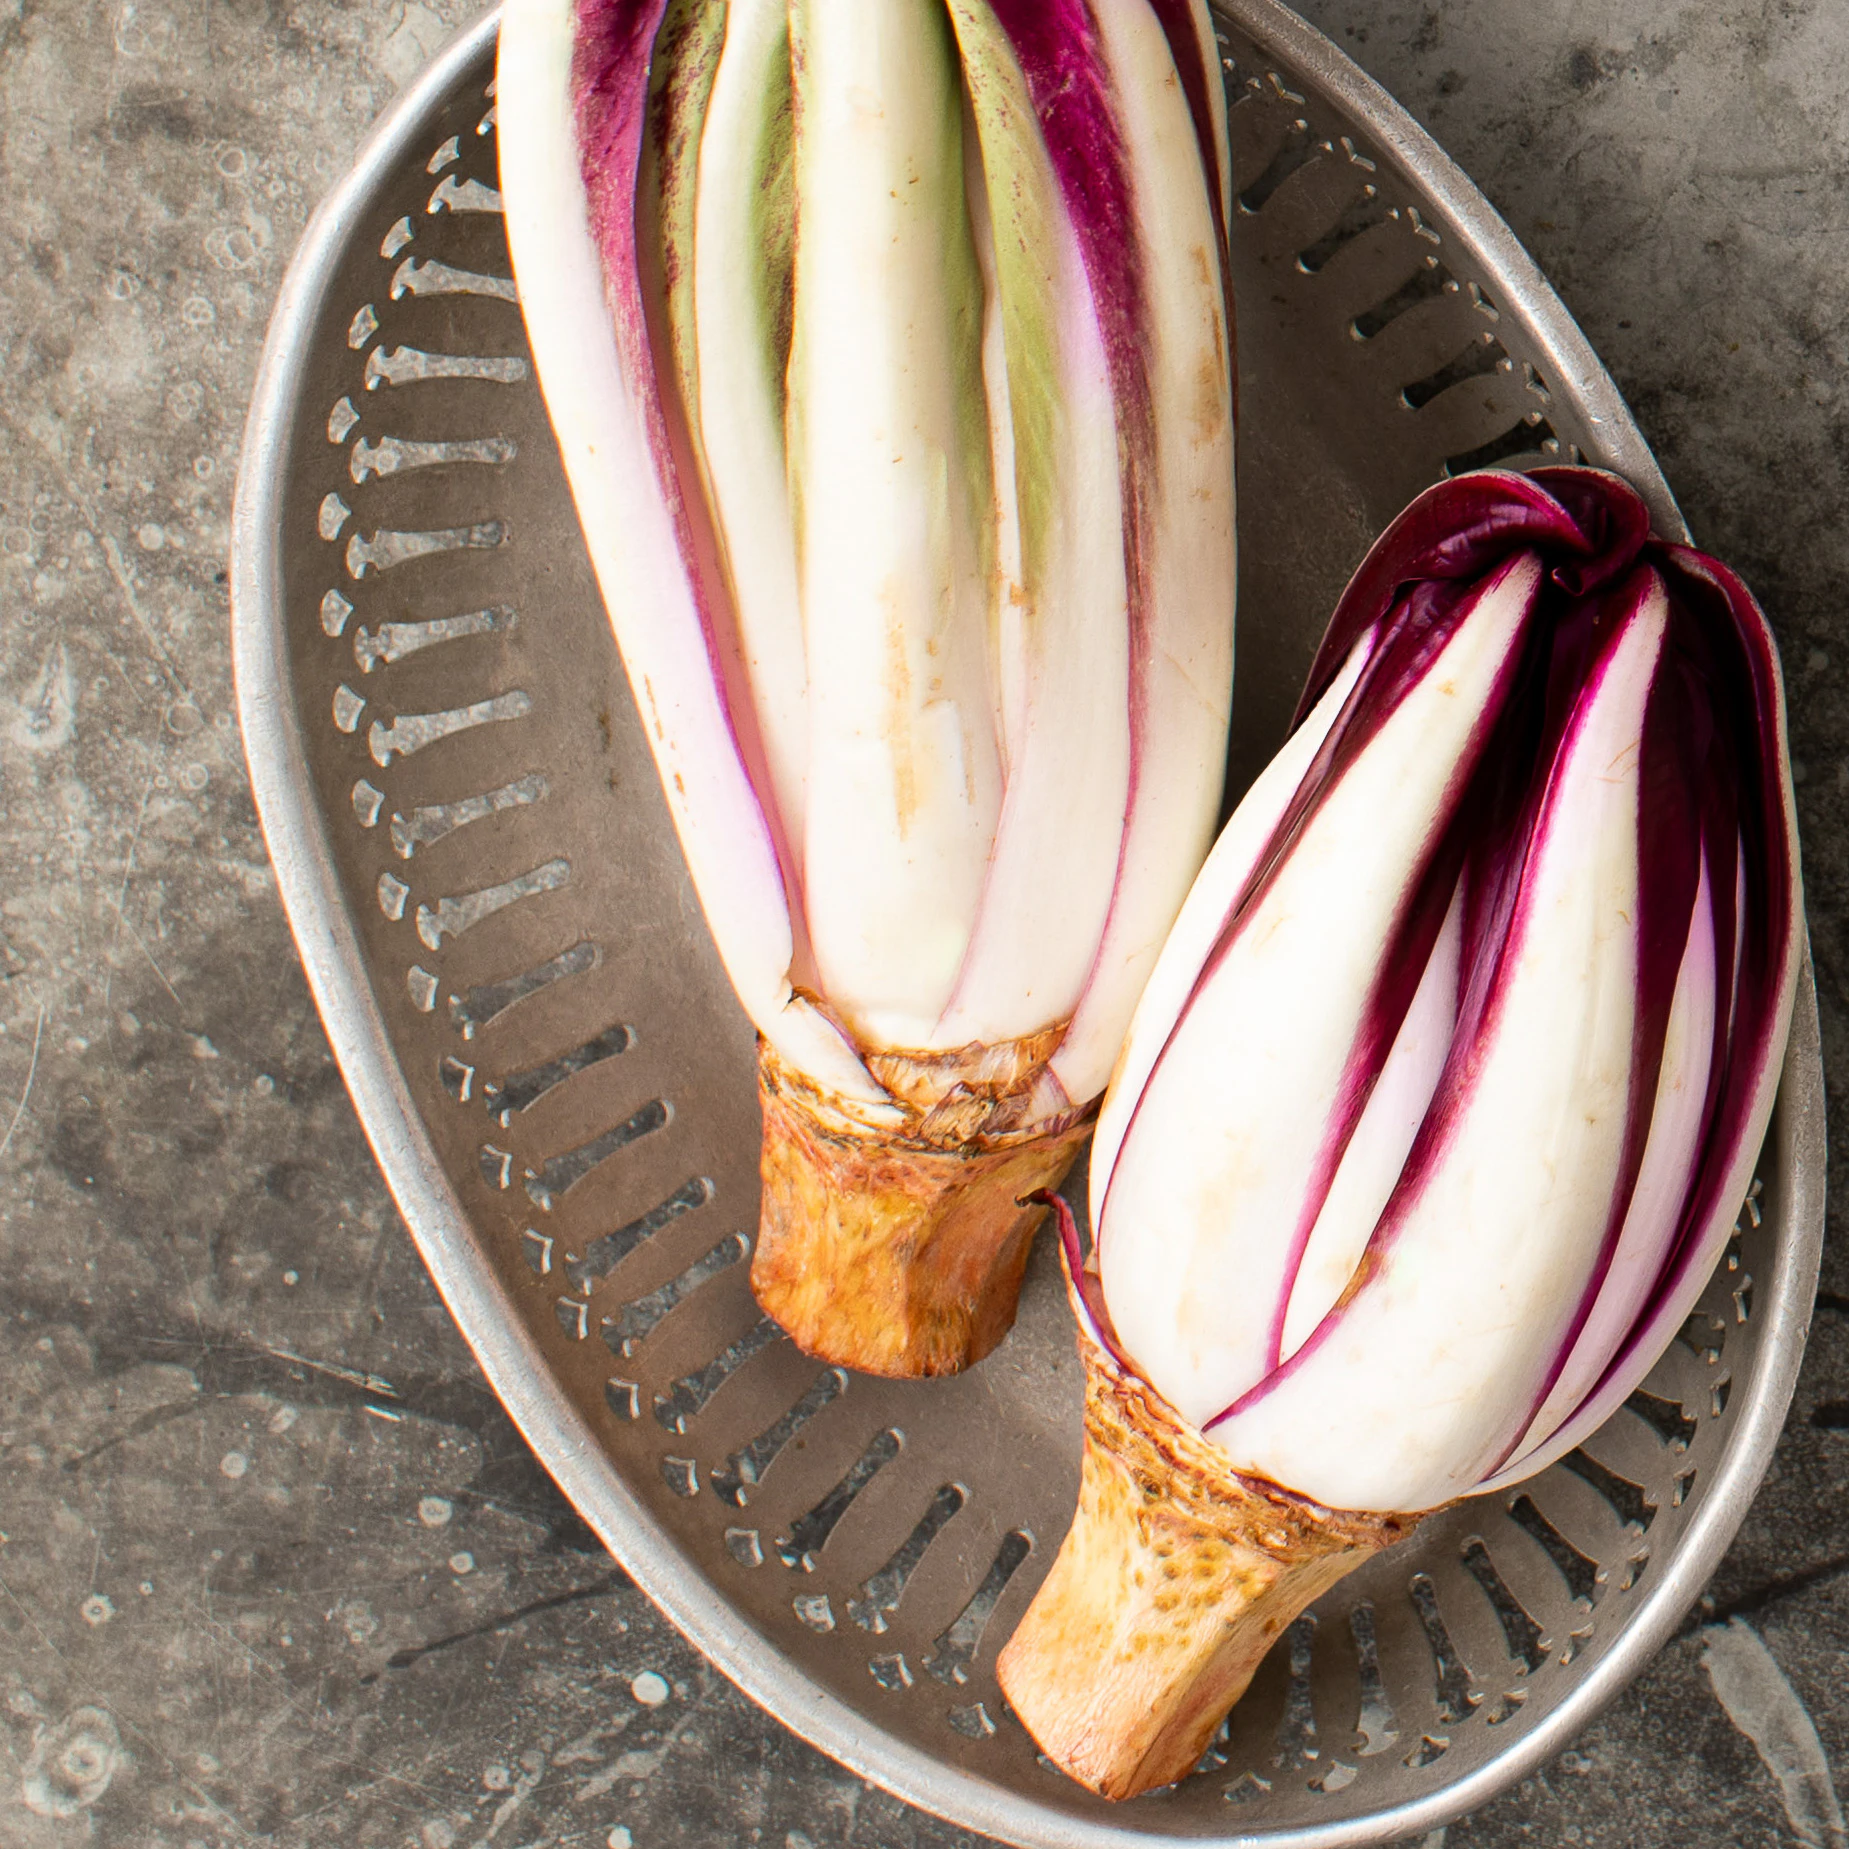 Two heads of radicchio in a metal basket.